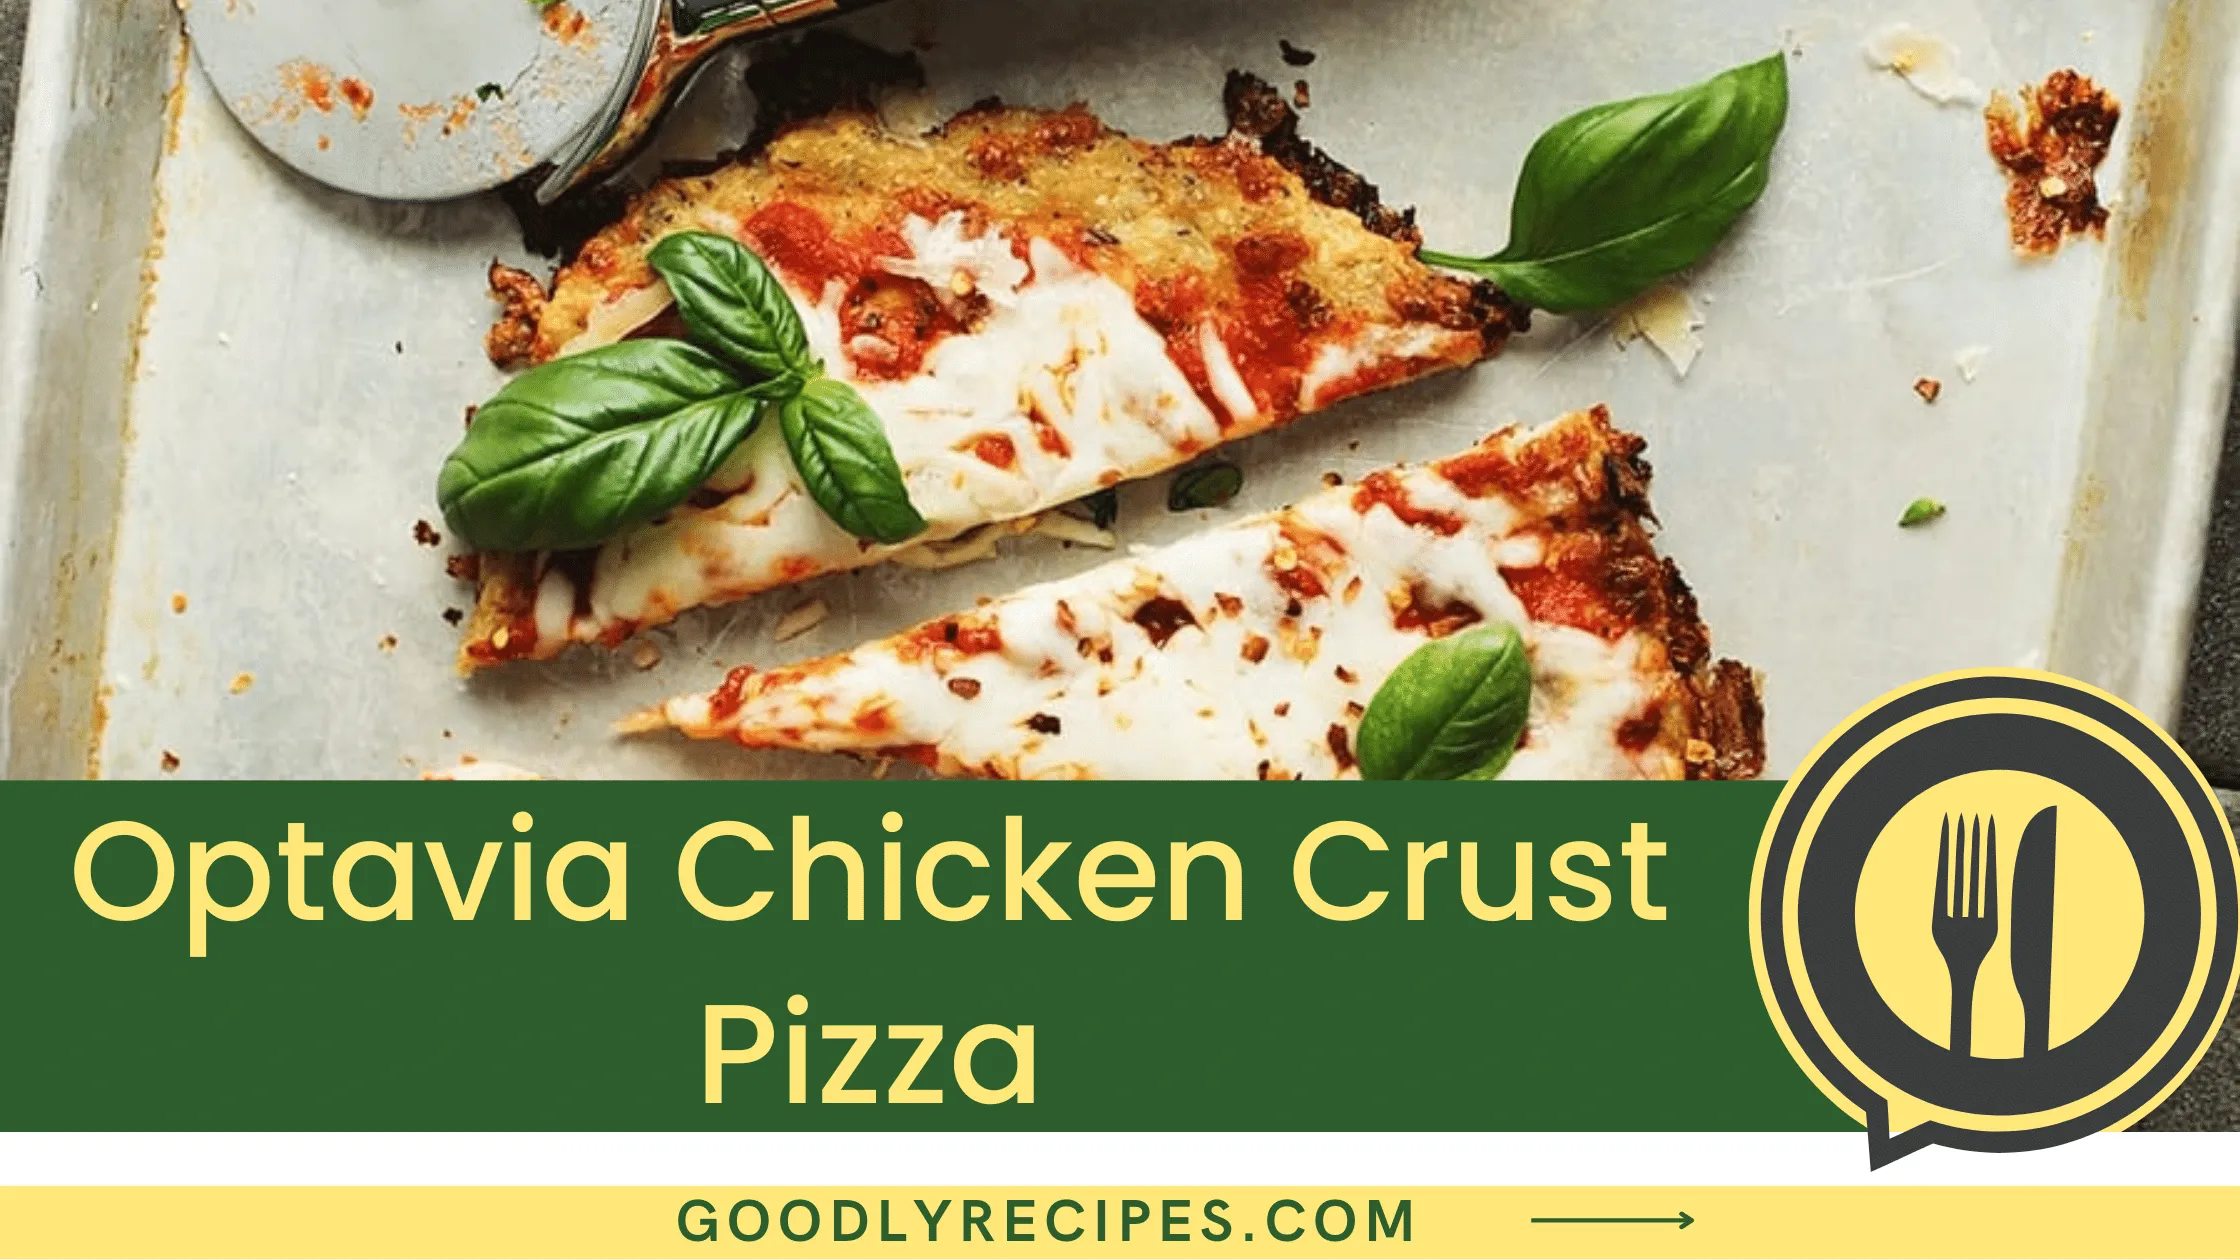 What Is Optavia Chicken Crust Pizza Rice?